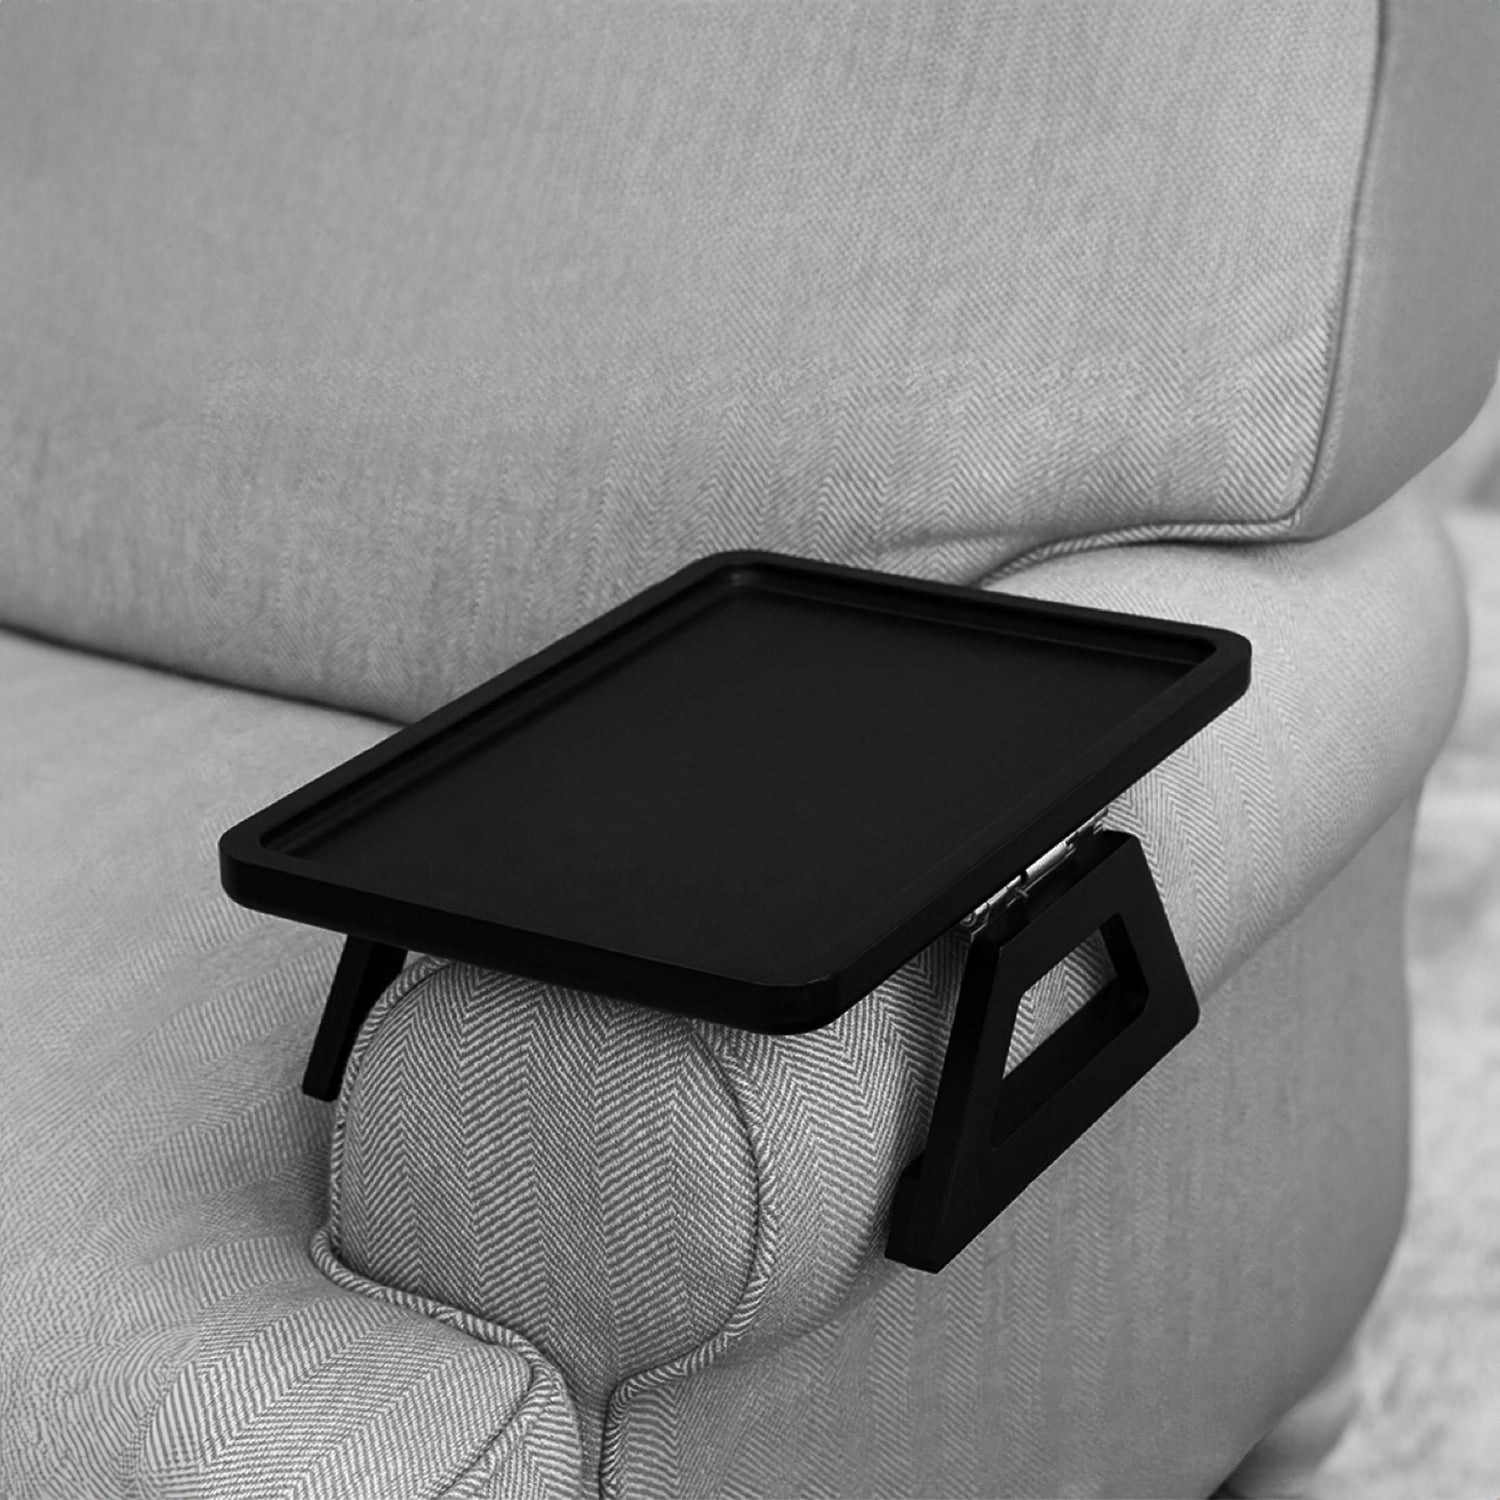 GOMINIMO Portable Sofa Arm Tray For Wide Couches(Black)